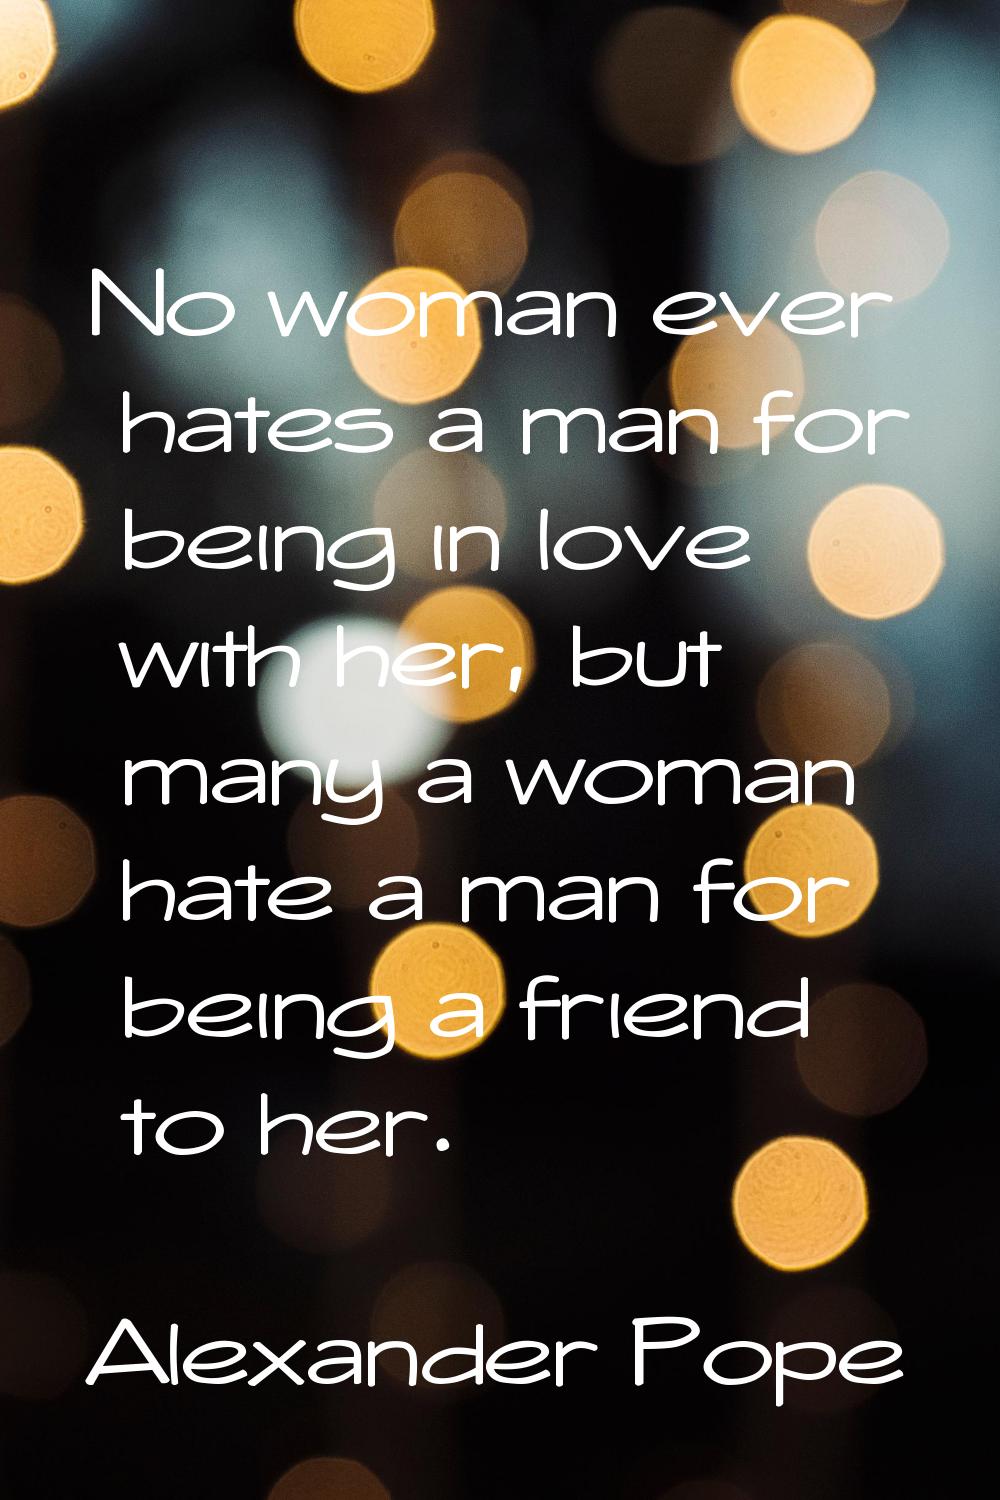 No woman ever hates a man for being in love with her, but many a woman hate a man for being a frien